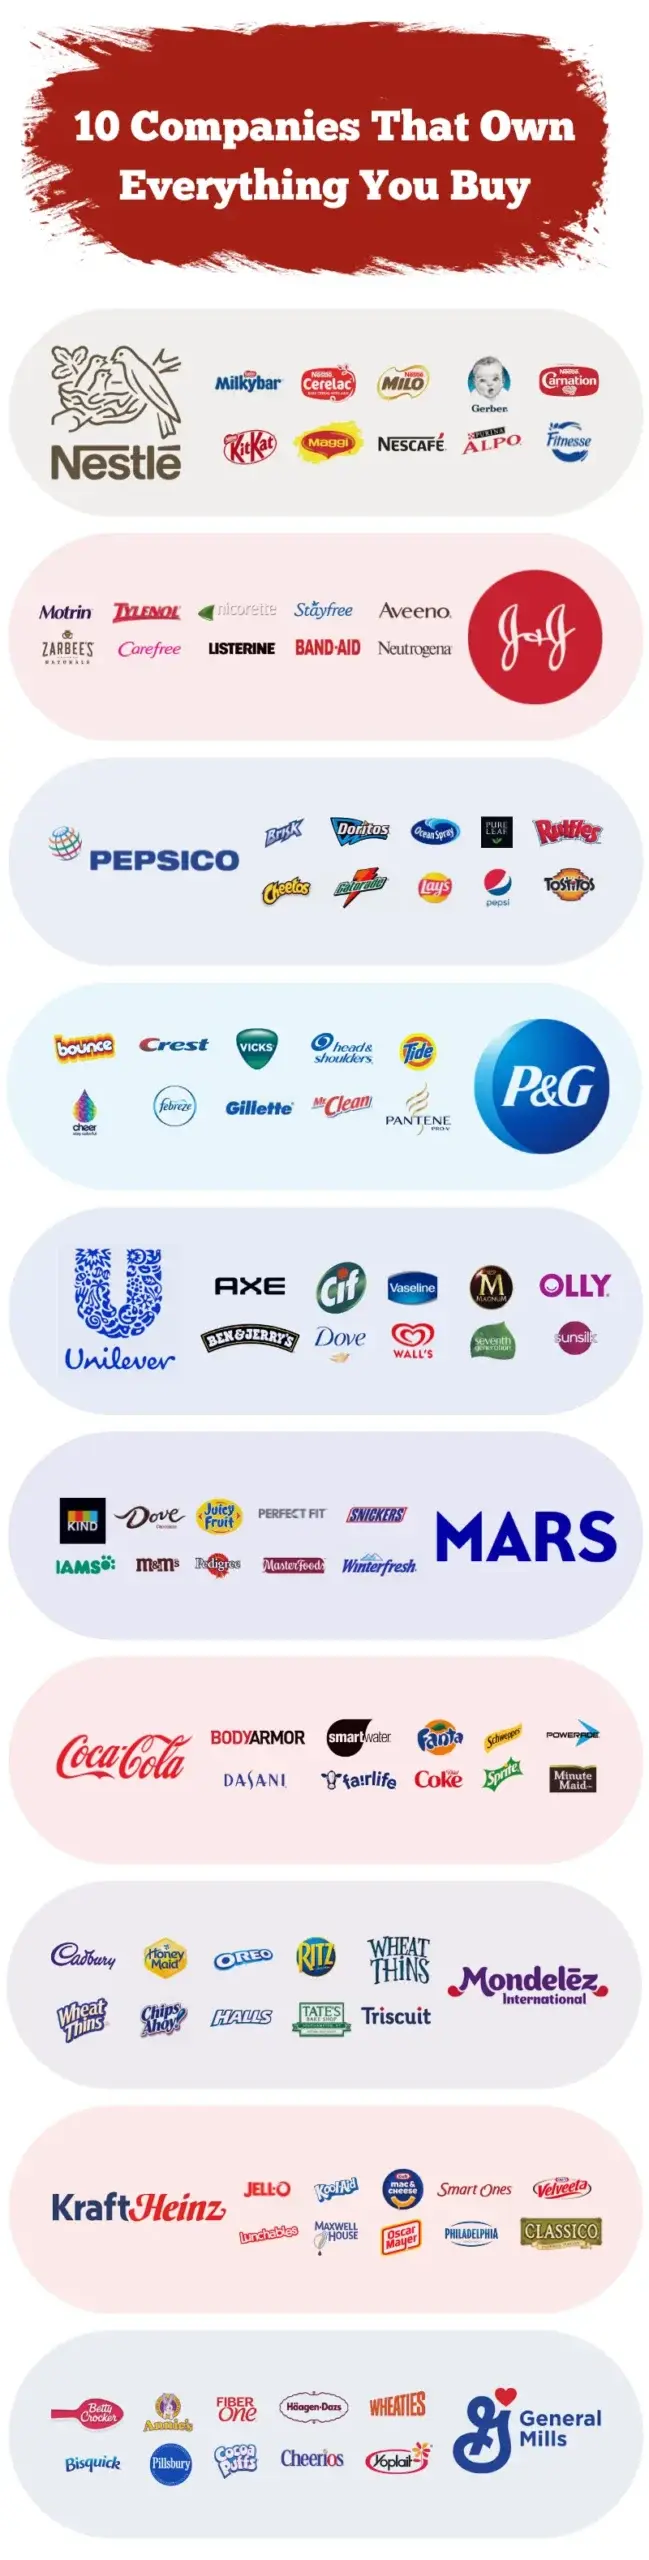 INFOGRAPHIC: 10 Companies That Own Everything